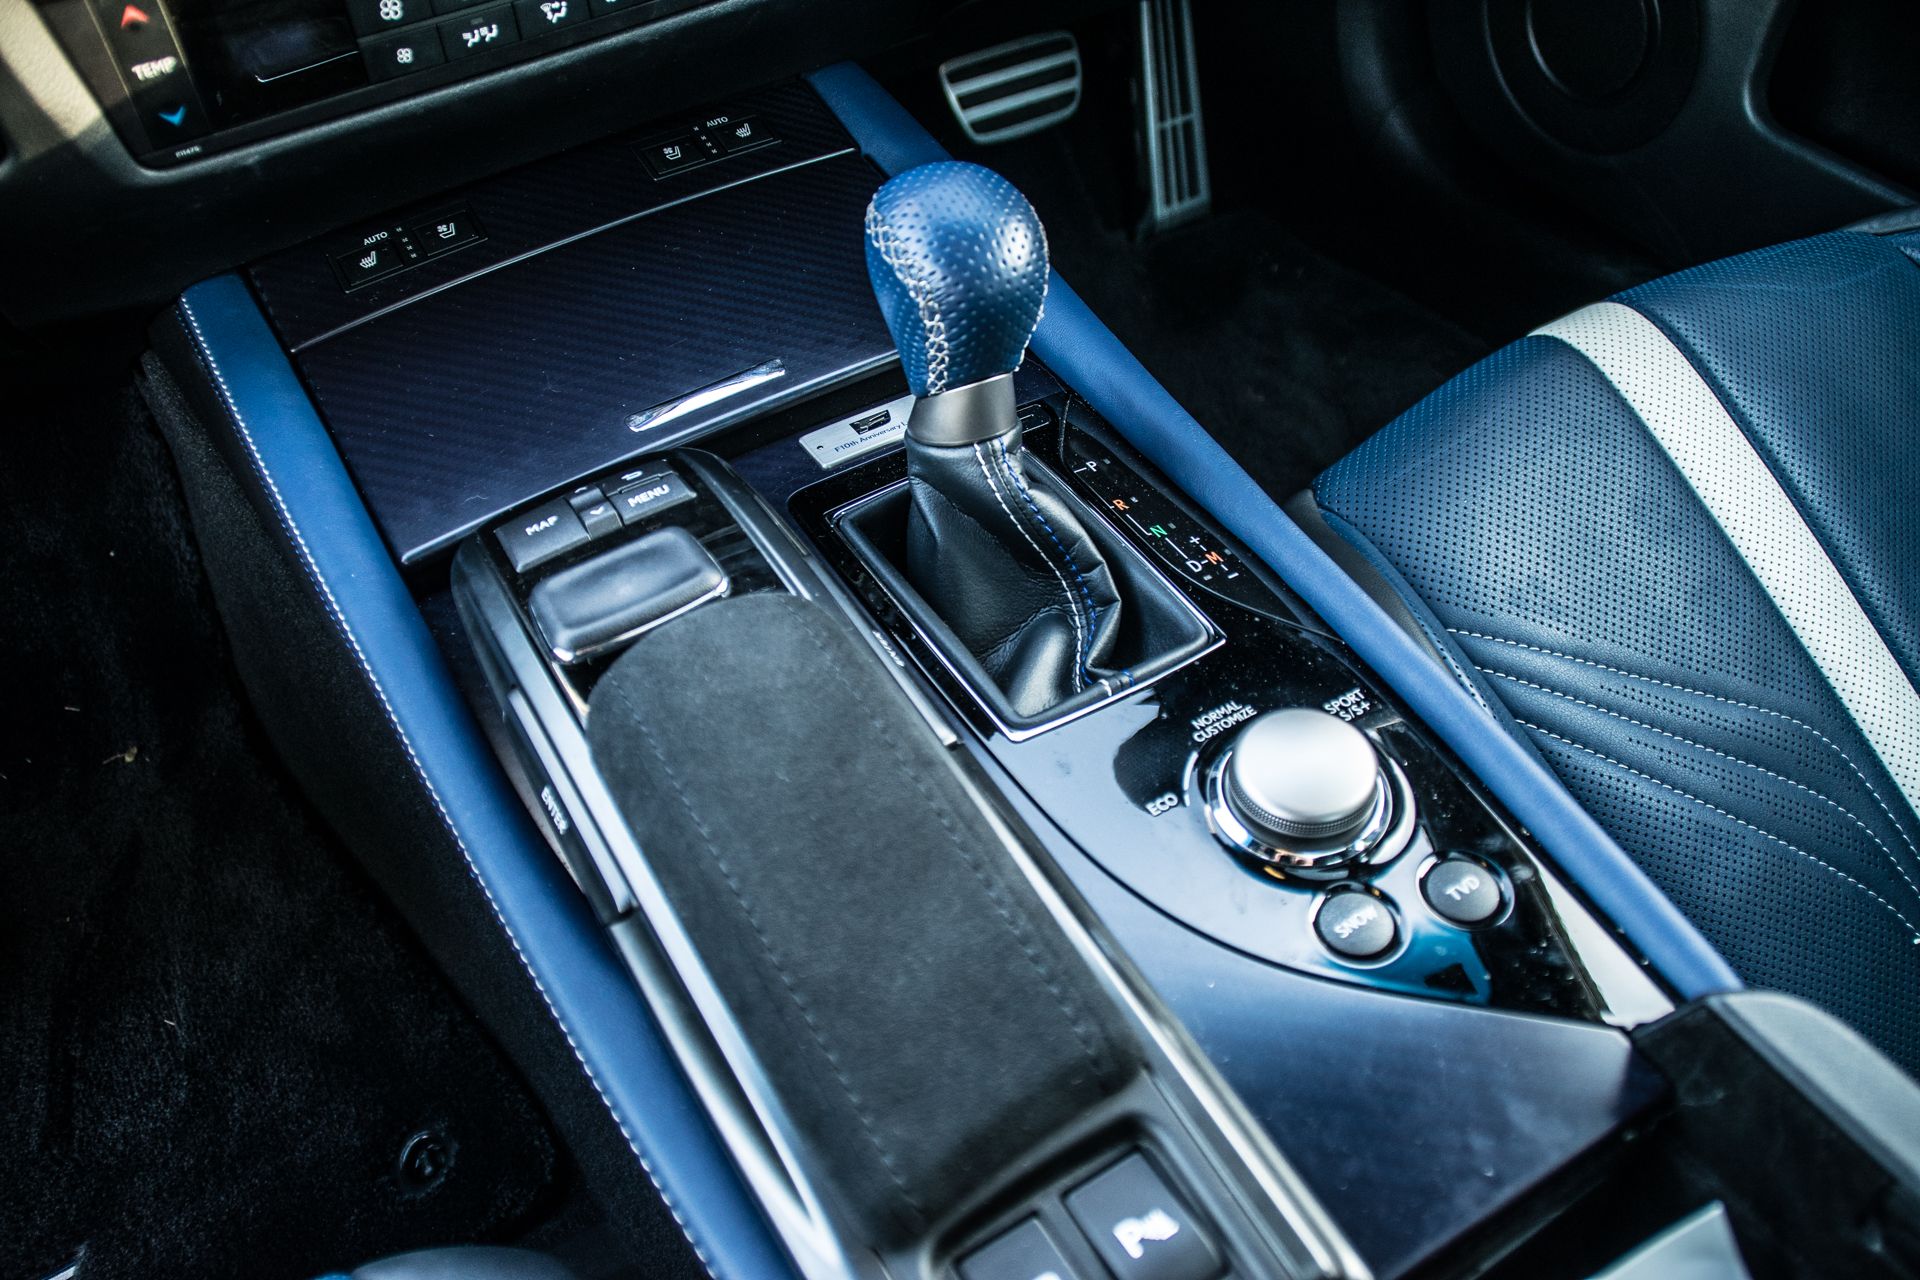 Understanding The Interior Of The Lexus Gs F Requires A Phd